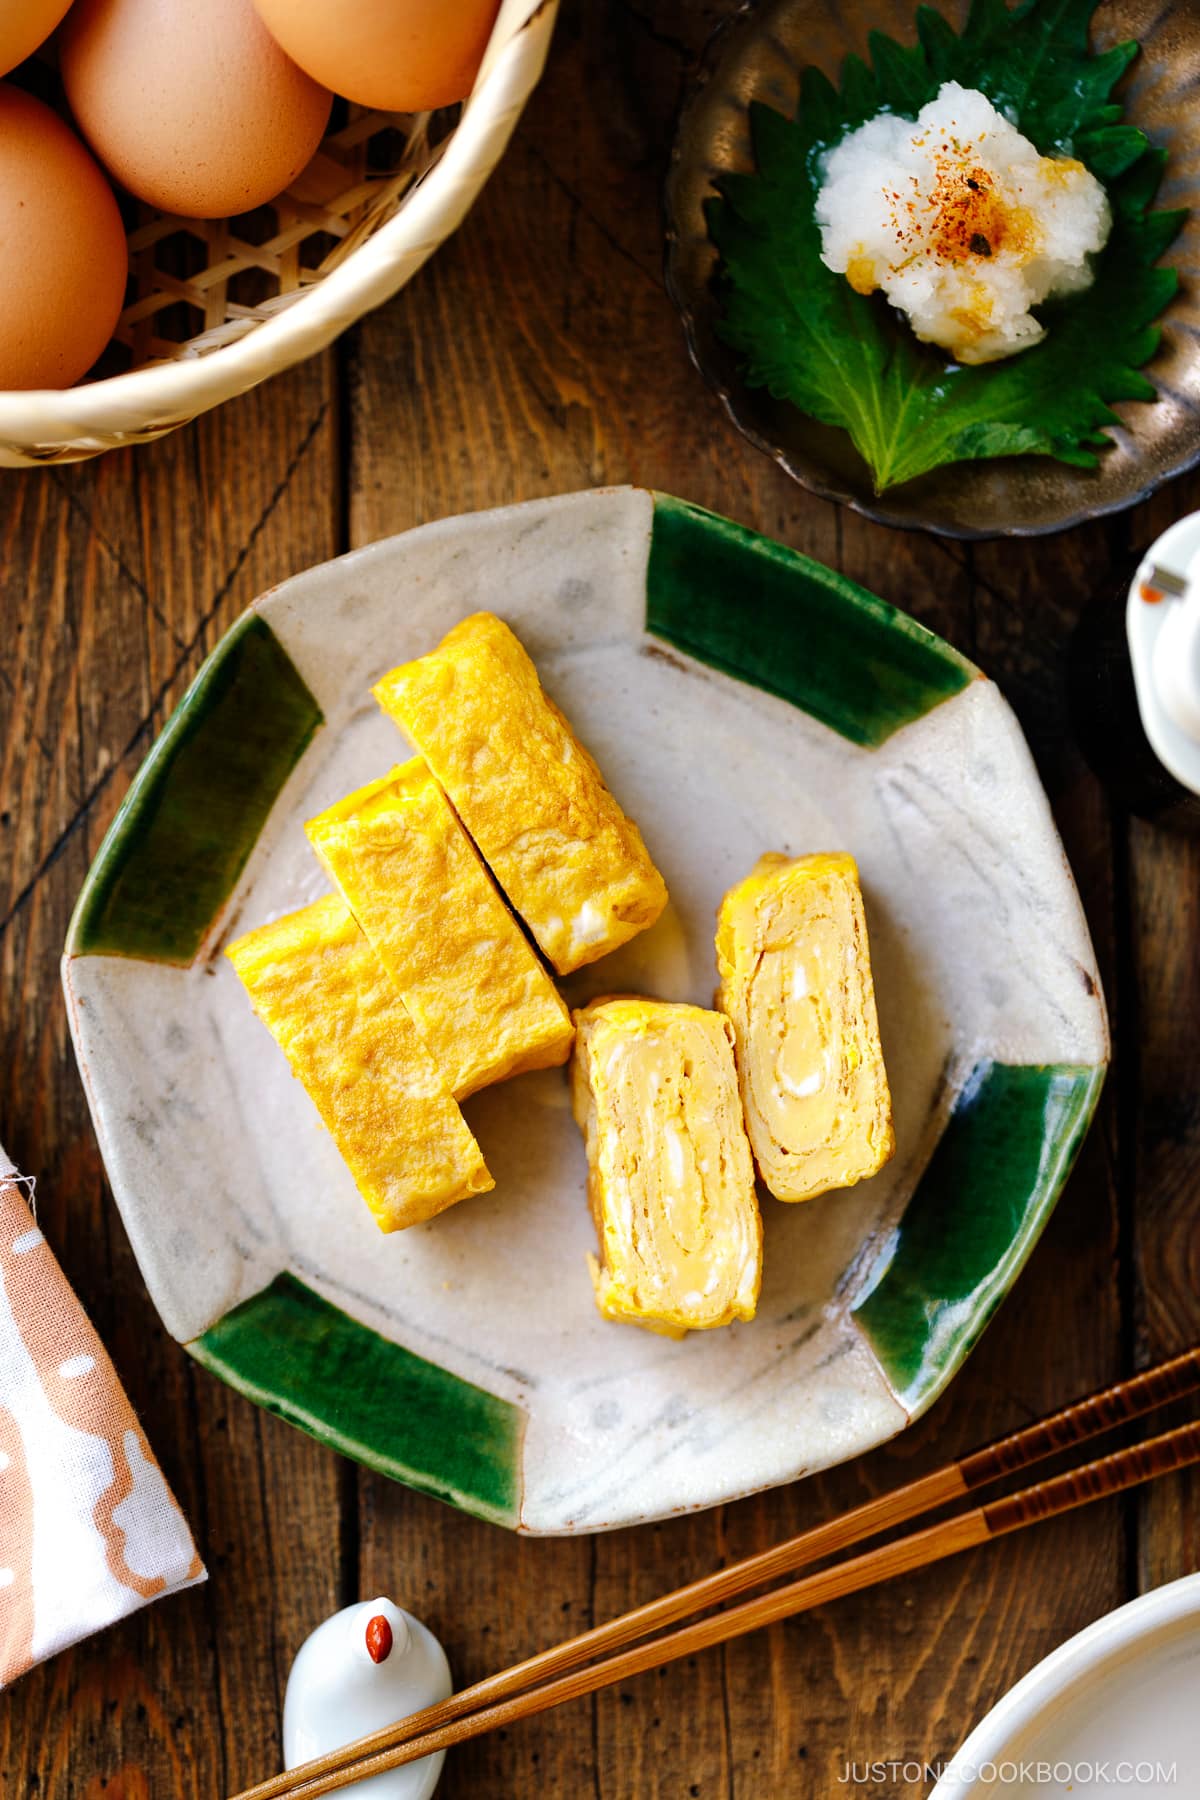 A Japanese ceramic plate containing Japanese rolled omelette, Tamagoyaki.